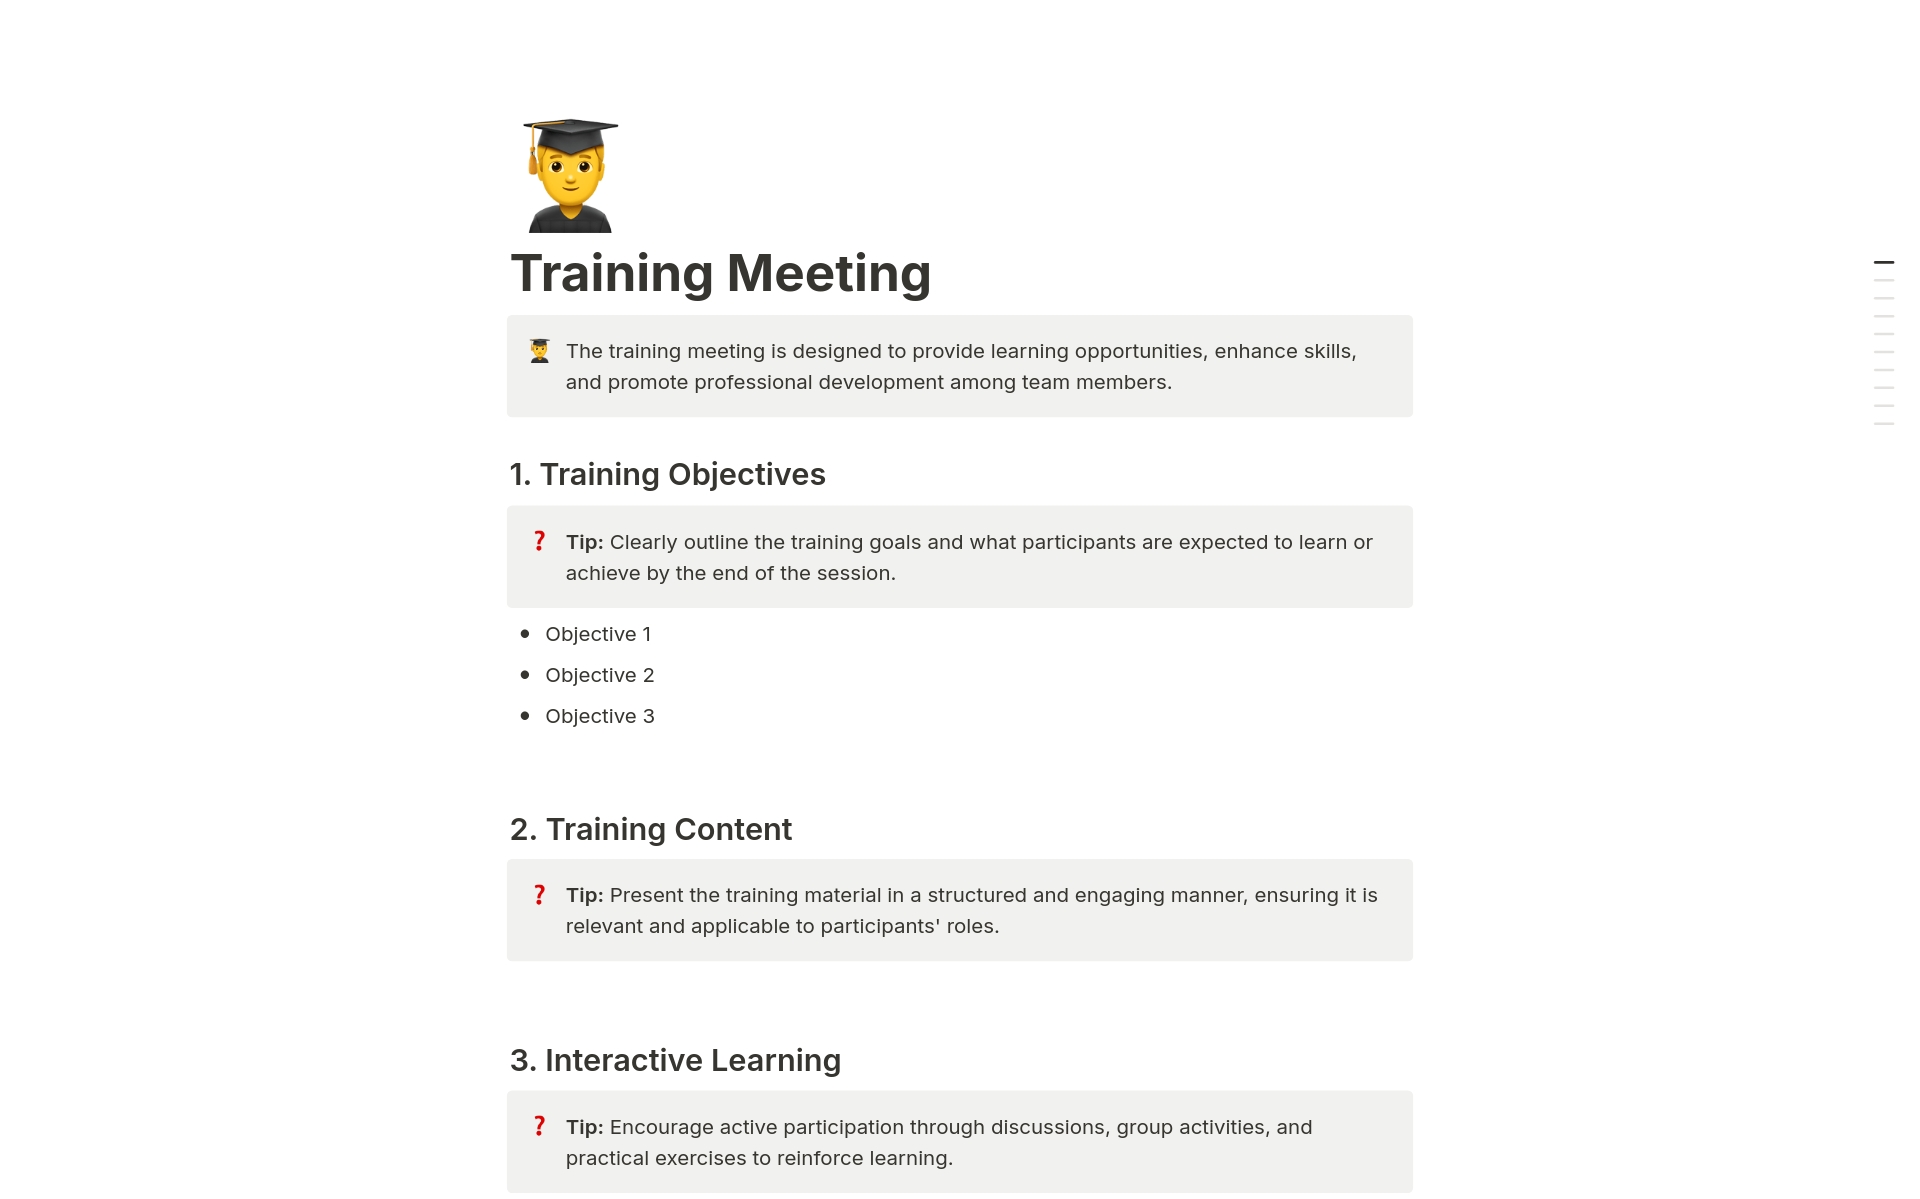 The training meeting is designed to provide learning opportunities, enhance skills, and promote professional development among team members.